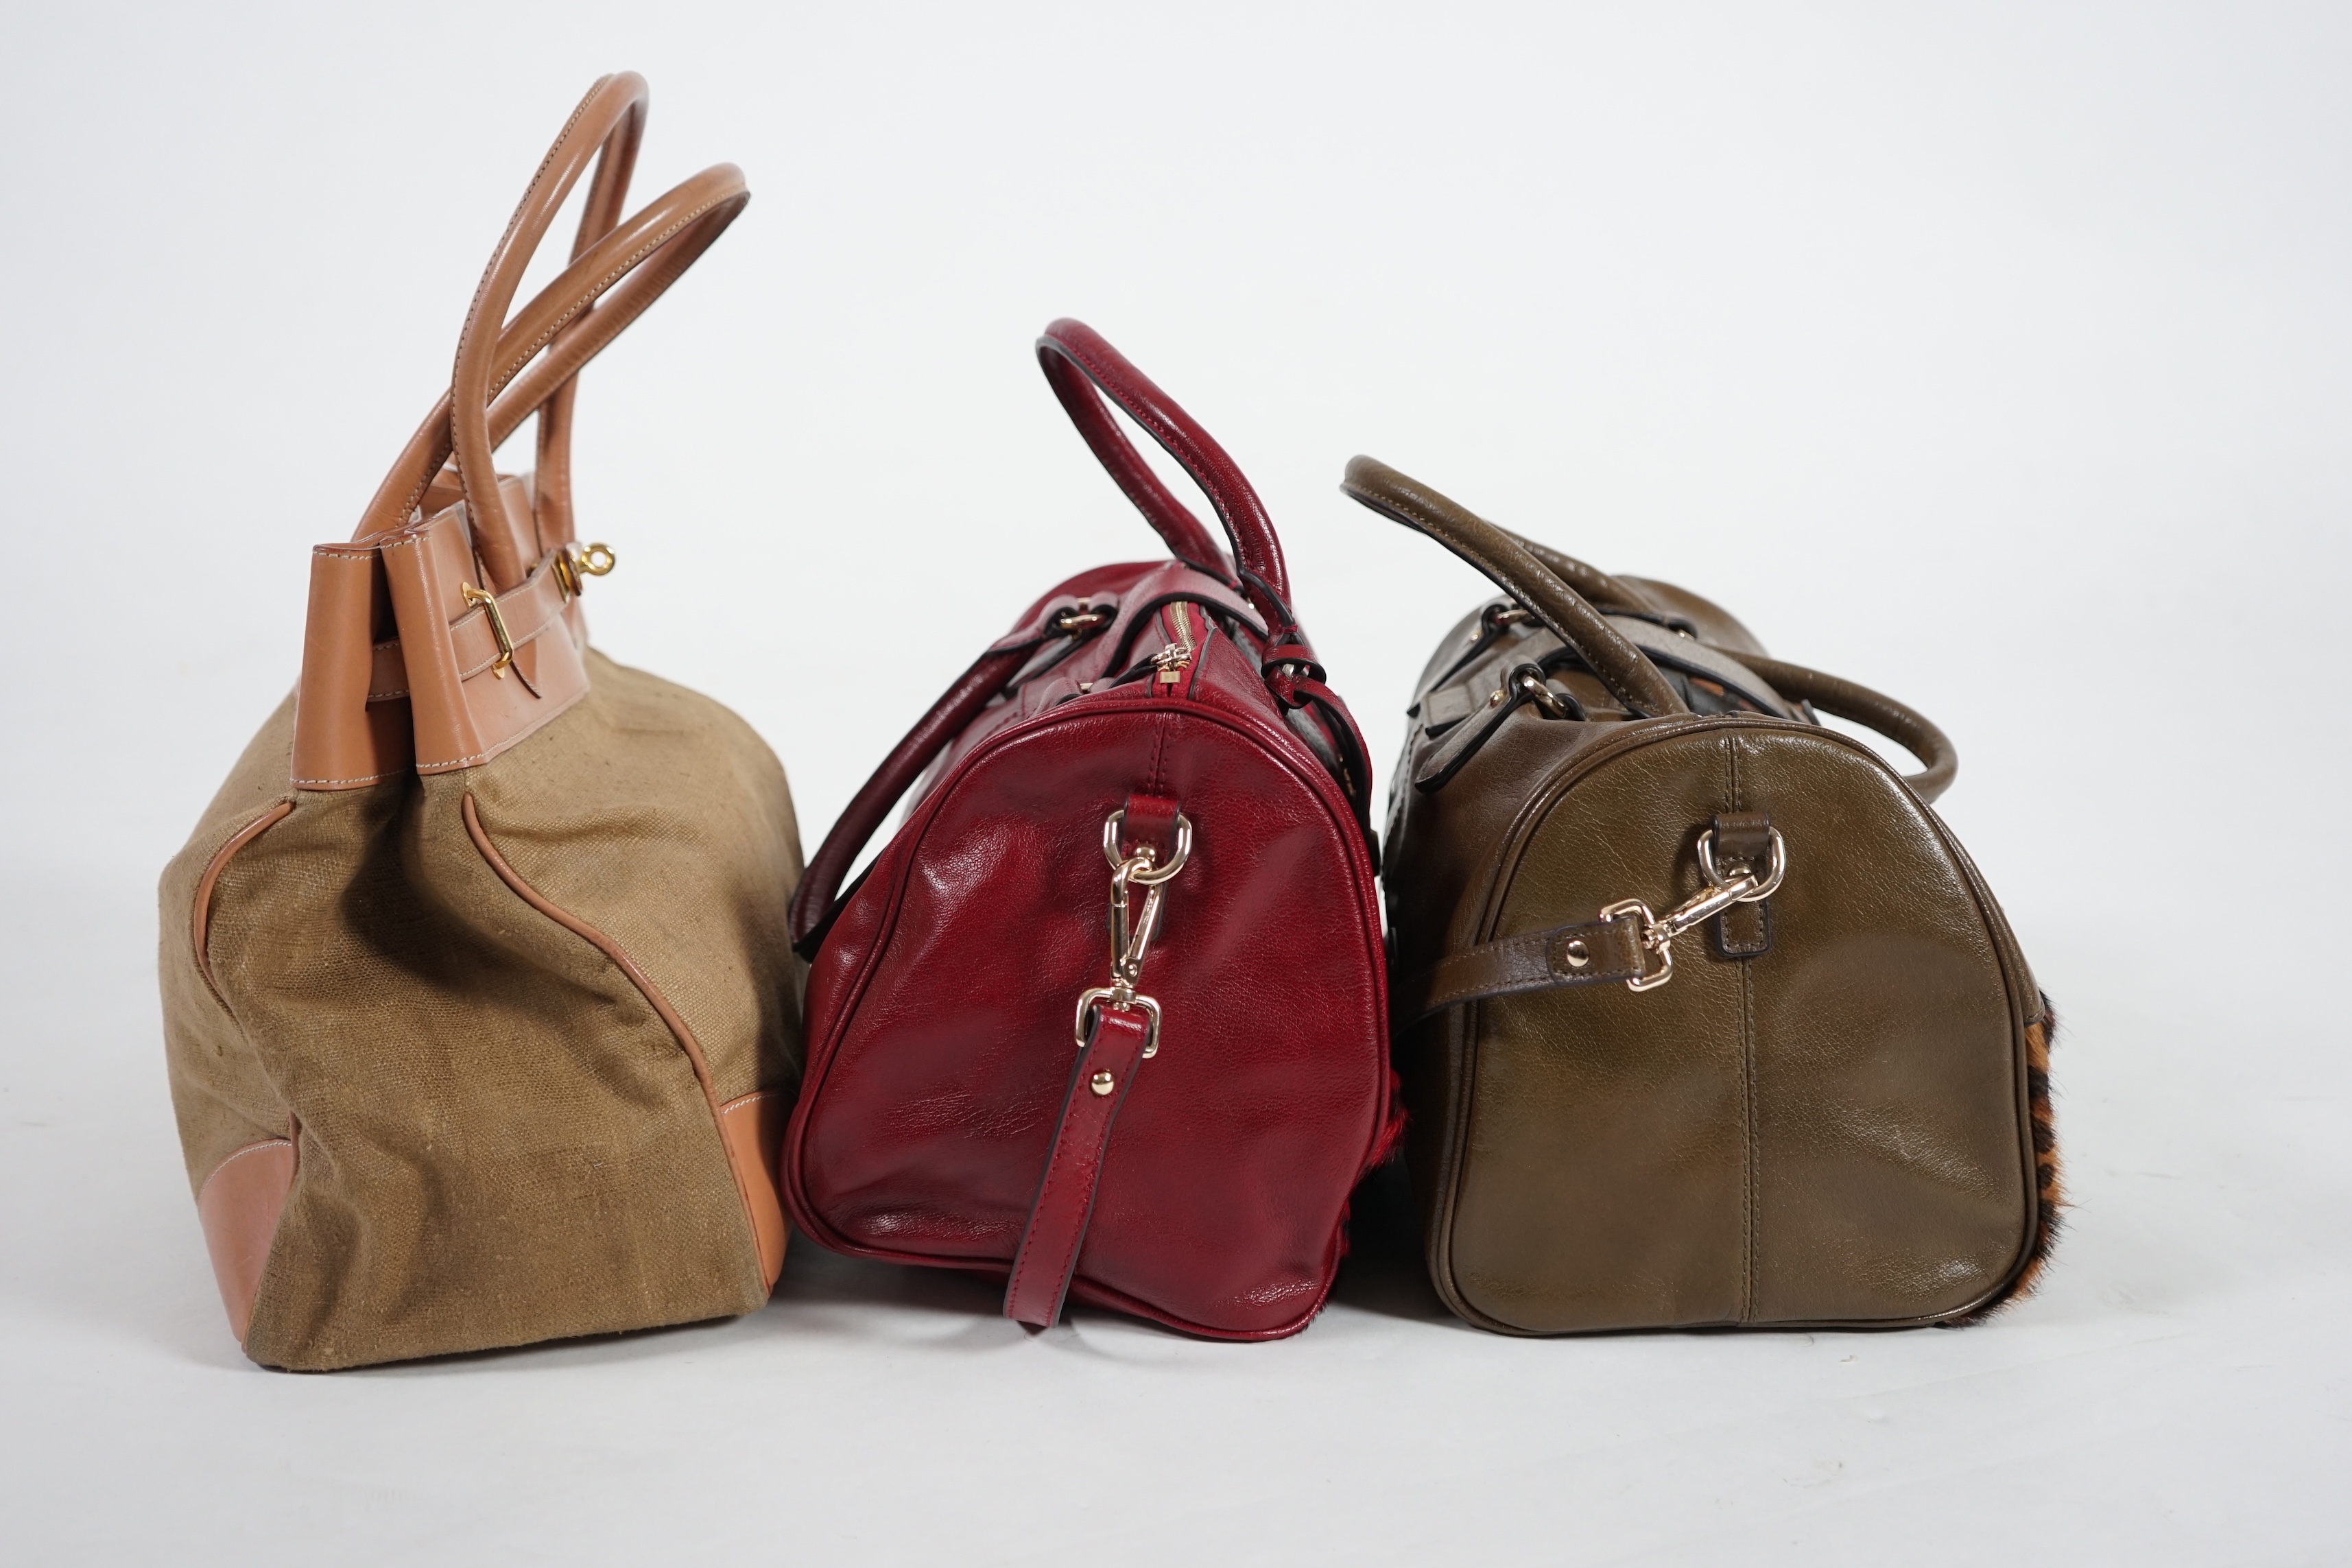 Two Maria Carla handbags and a Piertucci light tan canvas and leather bag. Proceeds to Happy Paws Puppy Rescue